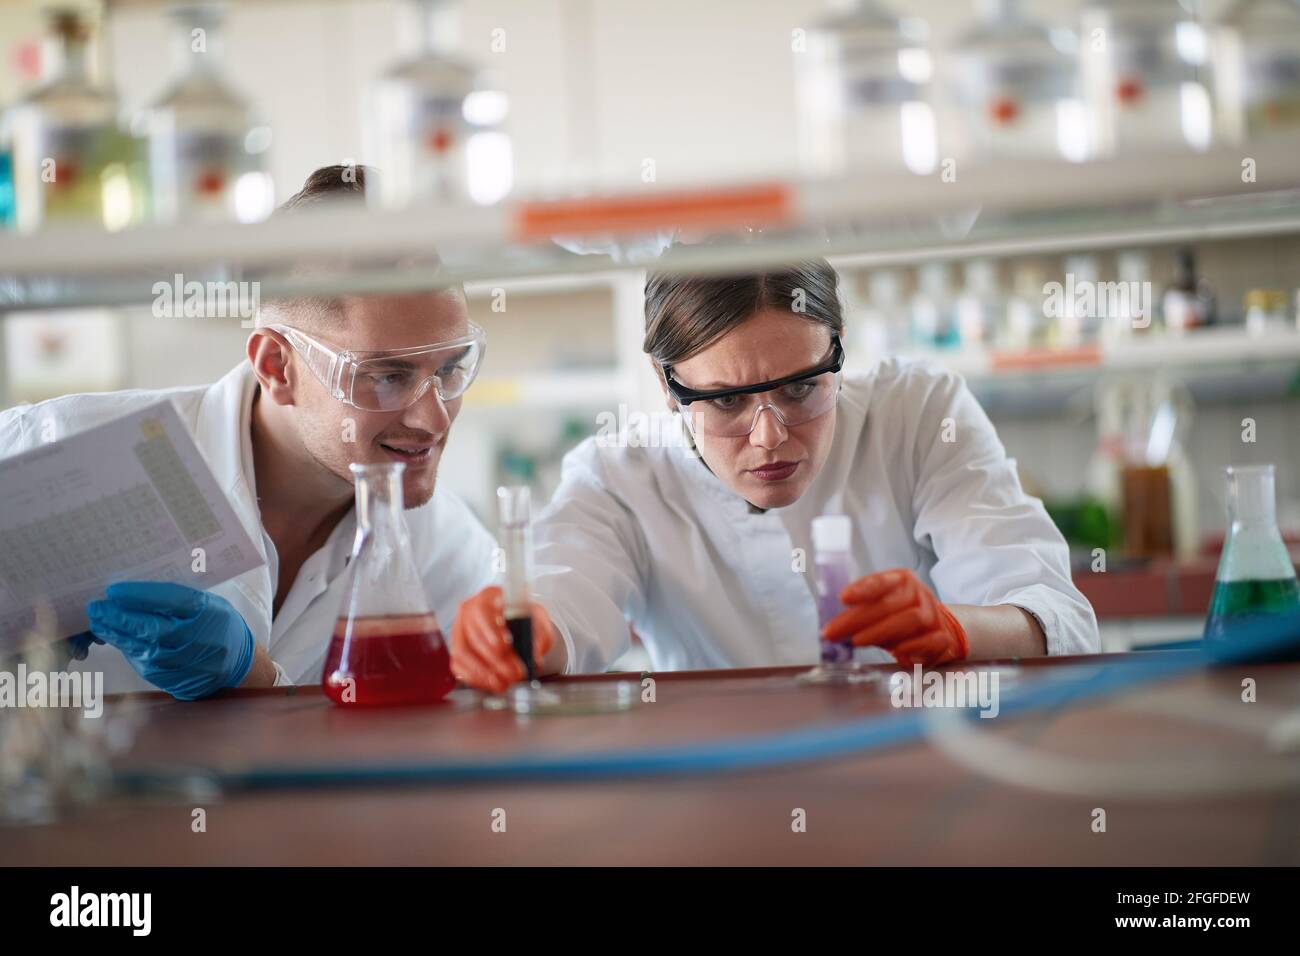 Young chemistry students in a protective gear analyze chemical reaction in a working atmosphere in the university laboratory. Science, chemistry, lab, Stock Photo